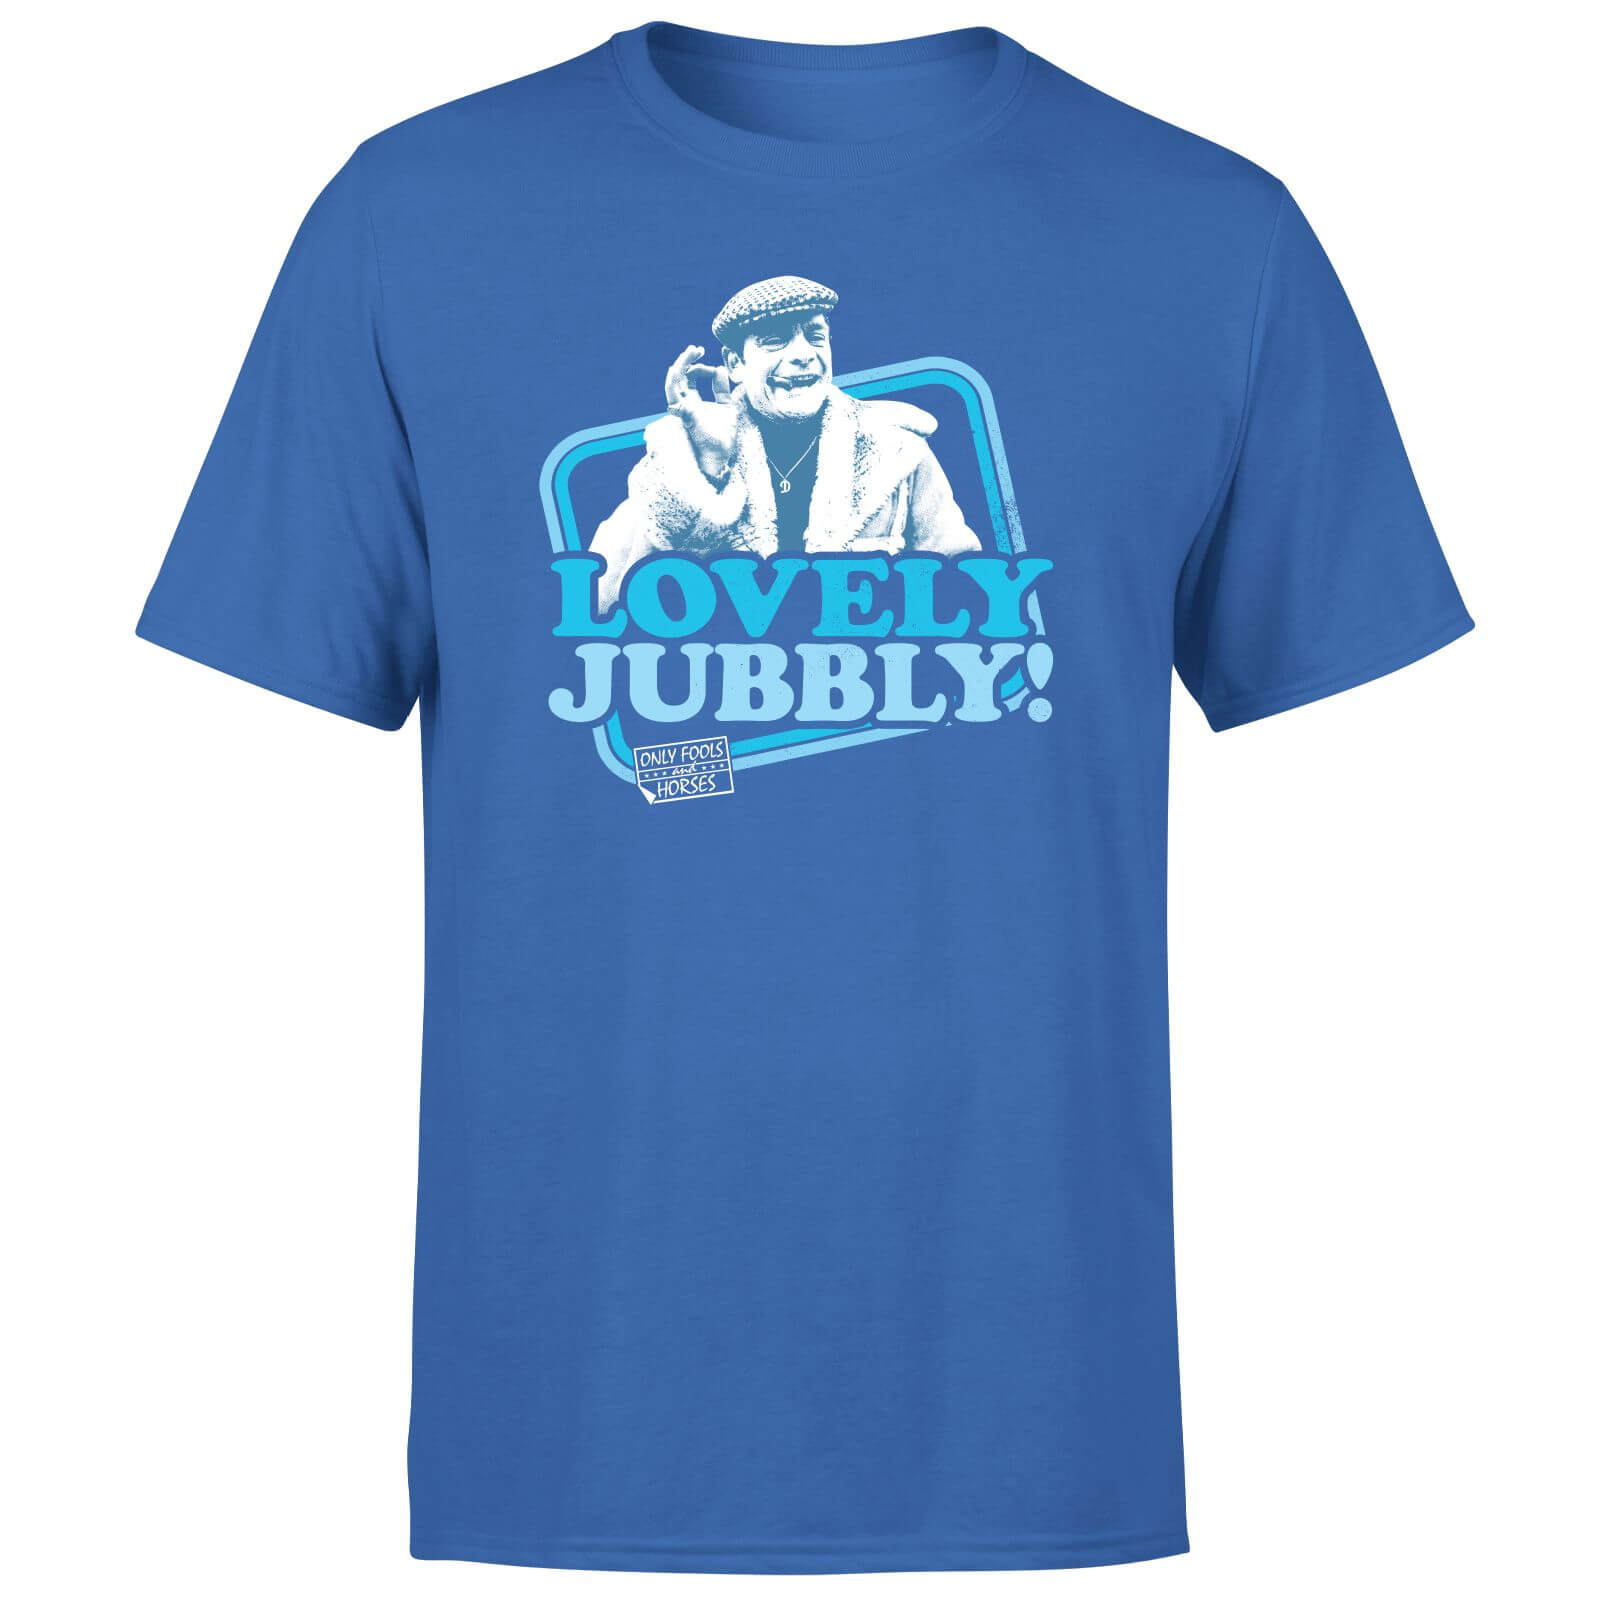 Only Fools And Horses Lovely Jubbly Unisex T-Shirt - Royal - XS